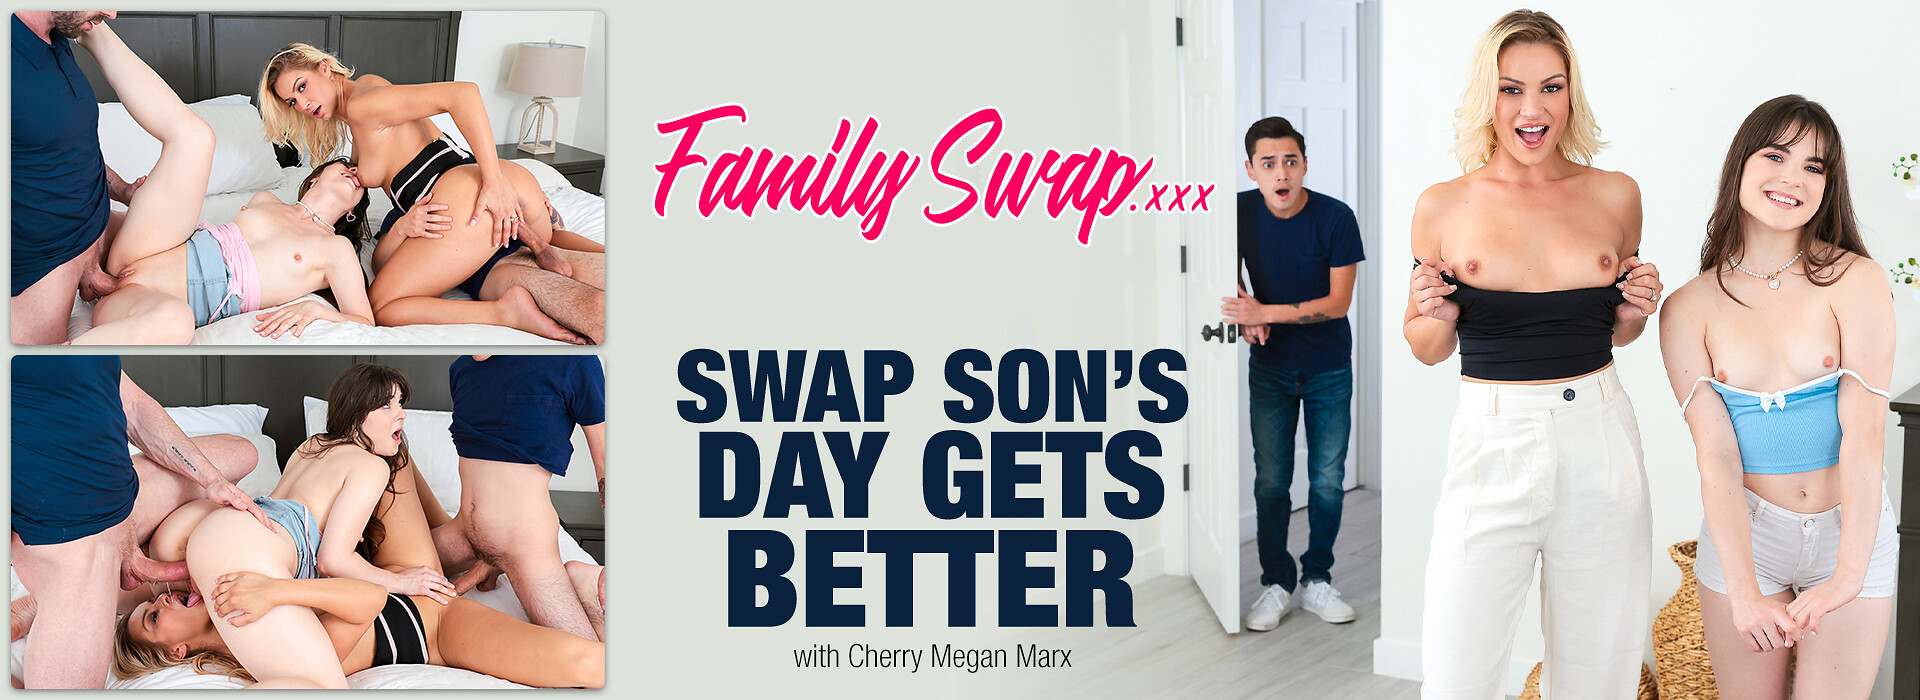 Swap Sons Bad Day Gets Better